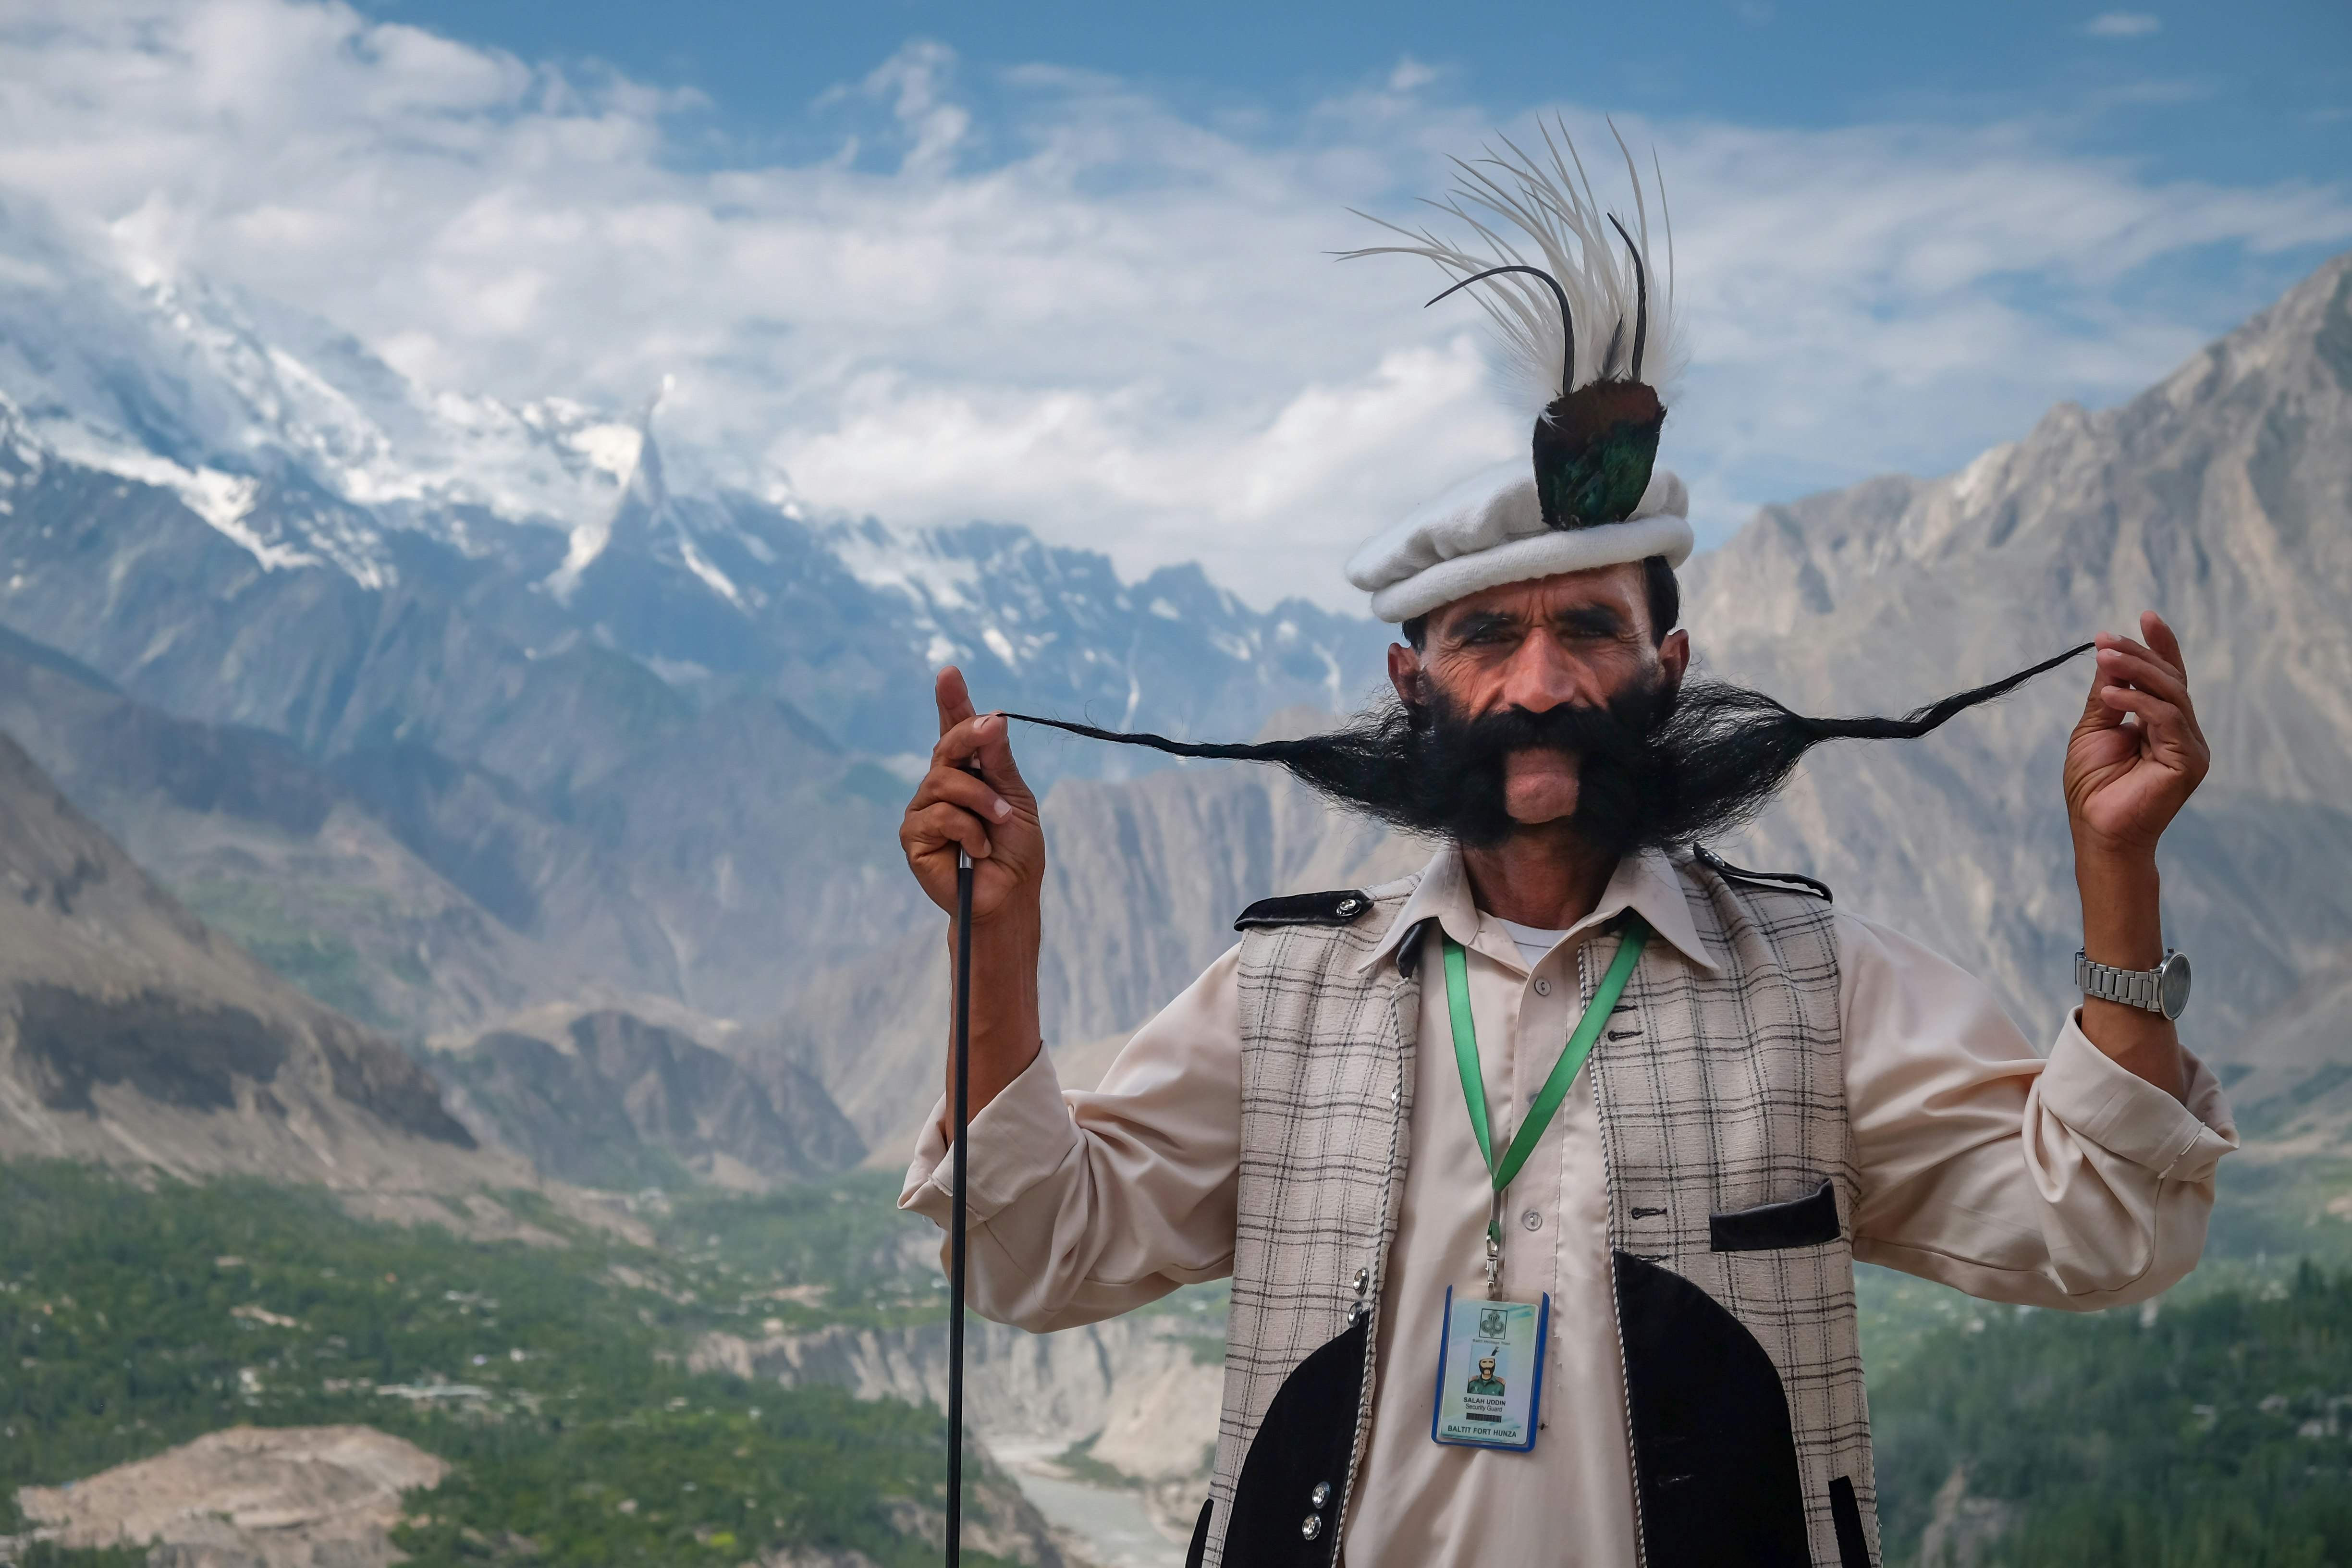 A local guide showcases his very long beard by holding the two ends up, away from his face. He is wearing a traditional hat, as well as a shirt and gilet. In the background a number of mountains can be seen.